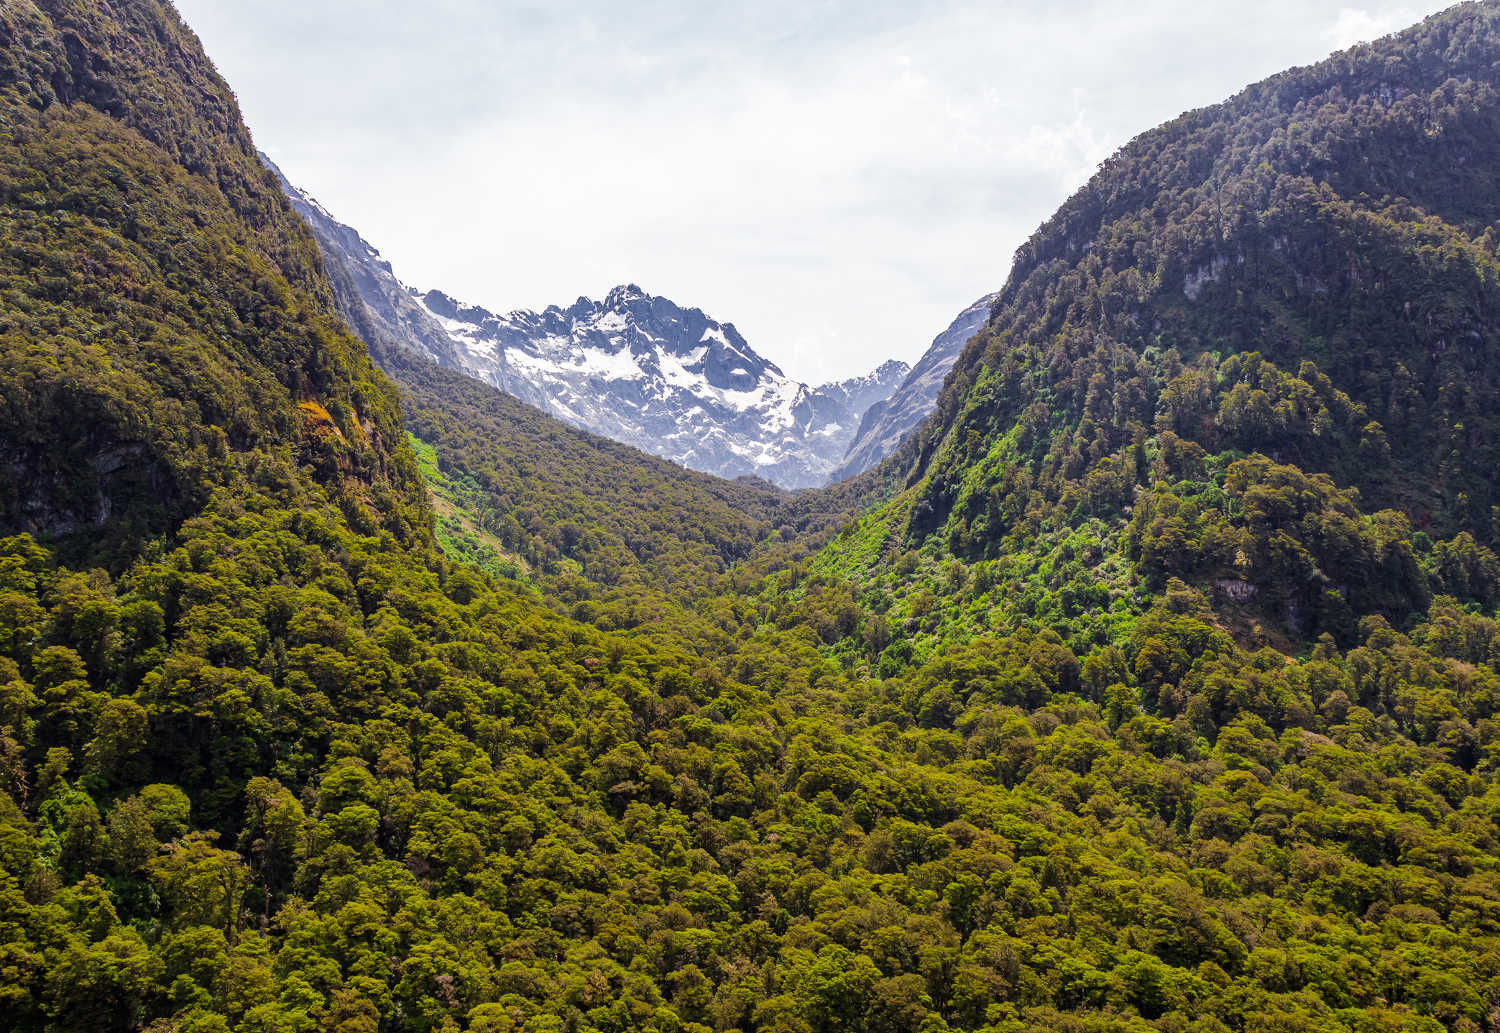 Pop`s view lookout. Landscapes of Fiordland National Park, South Island